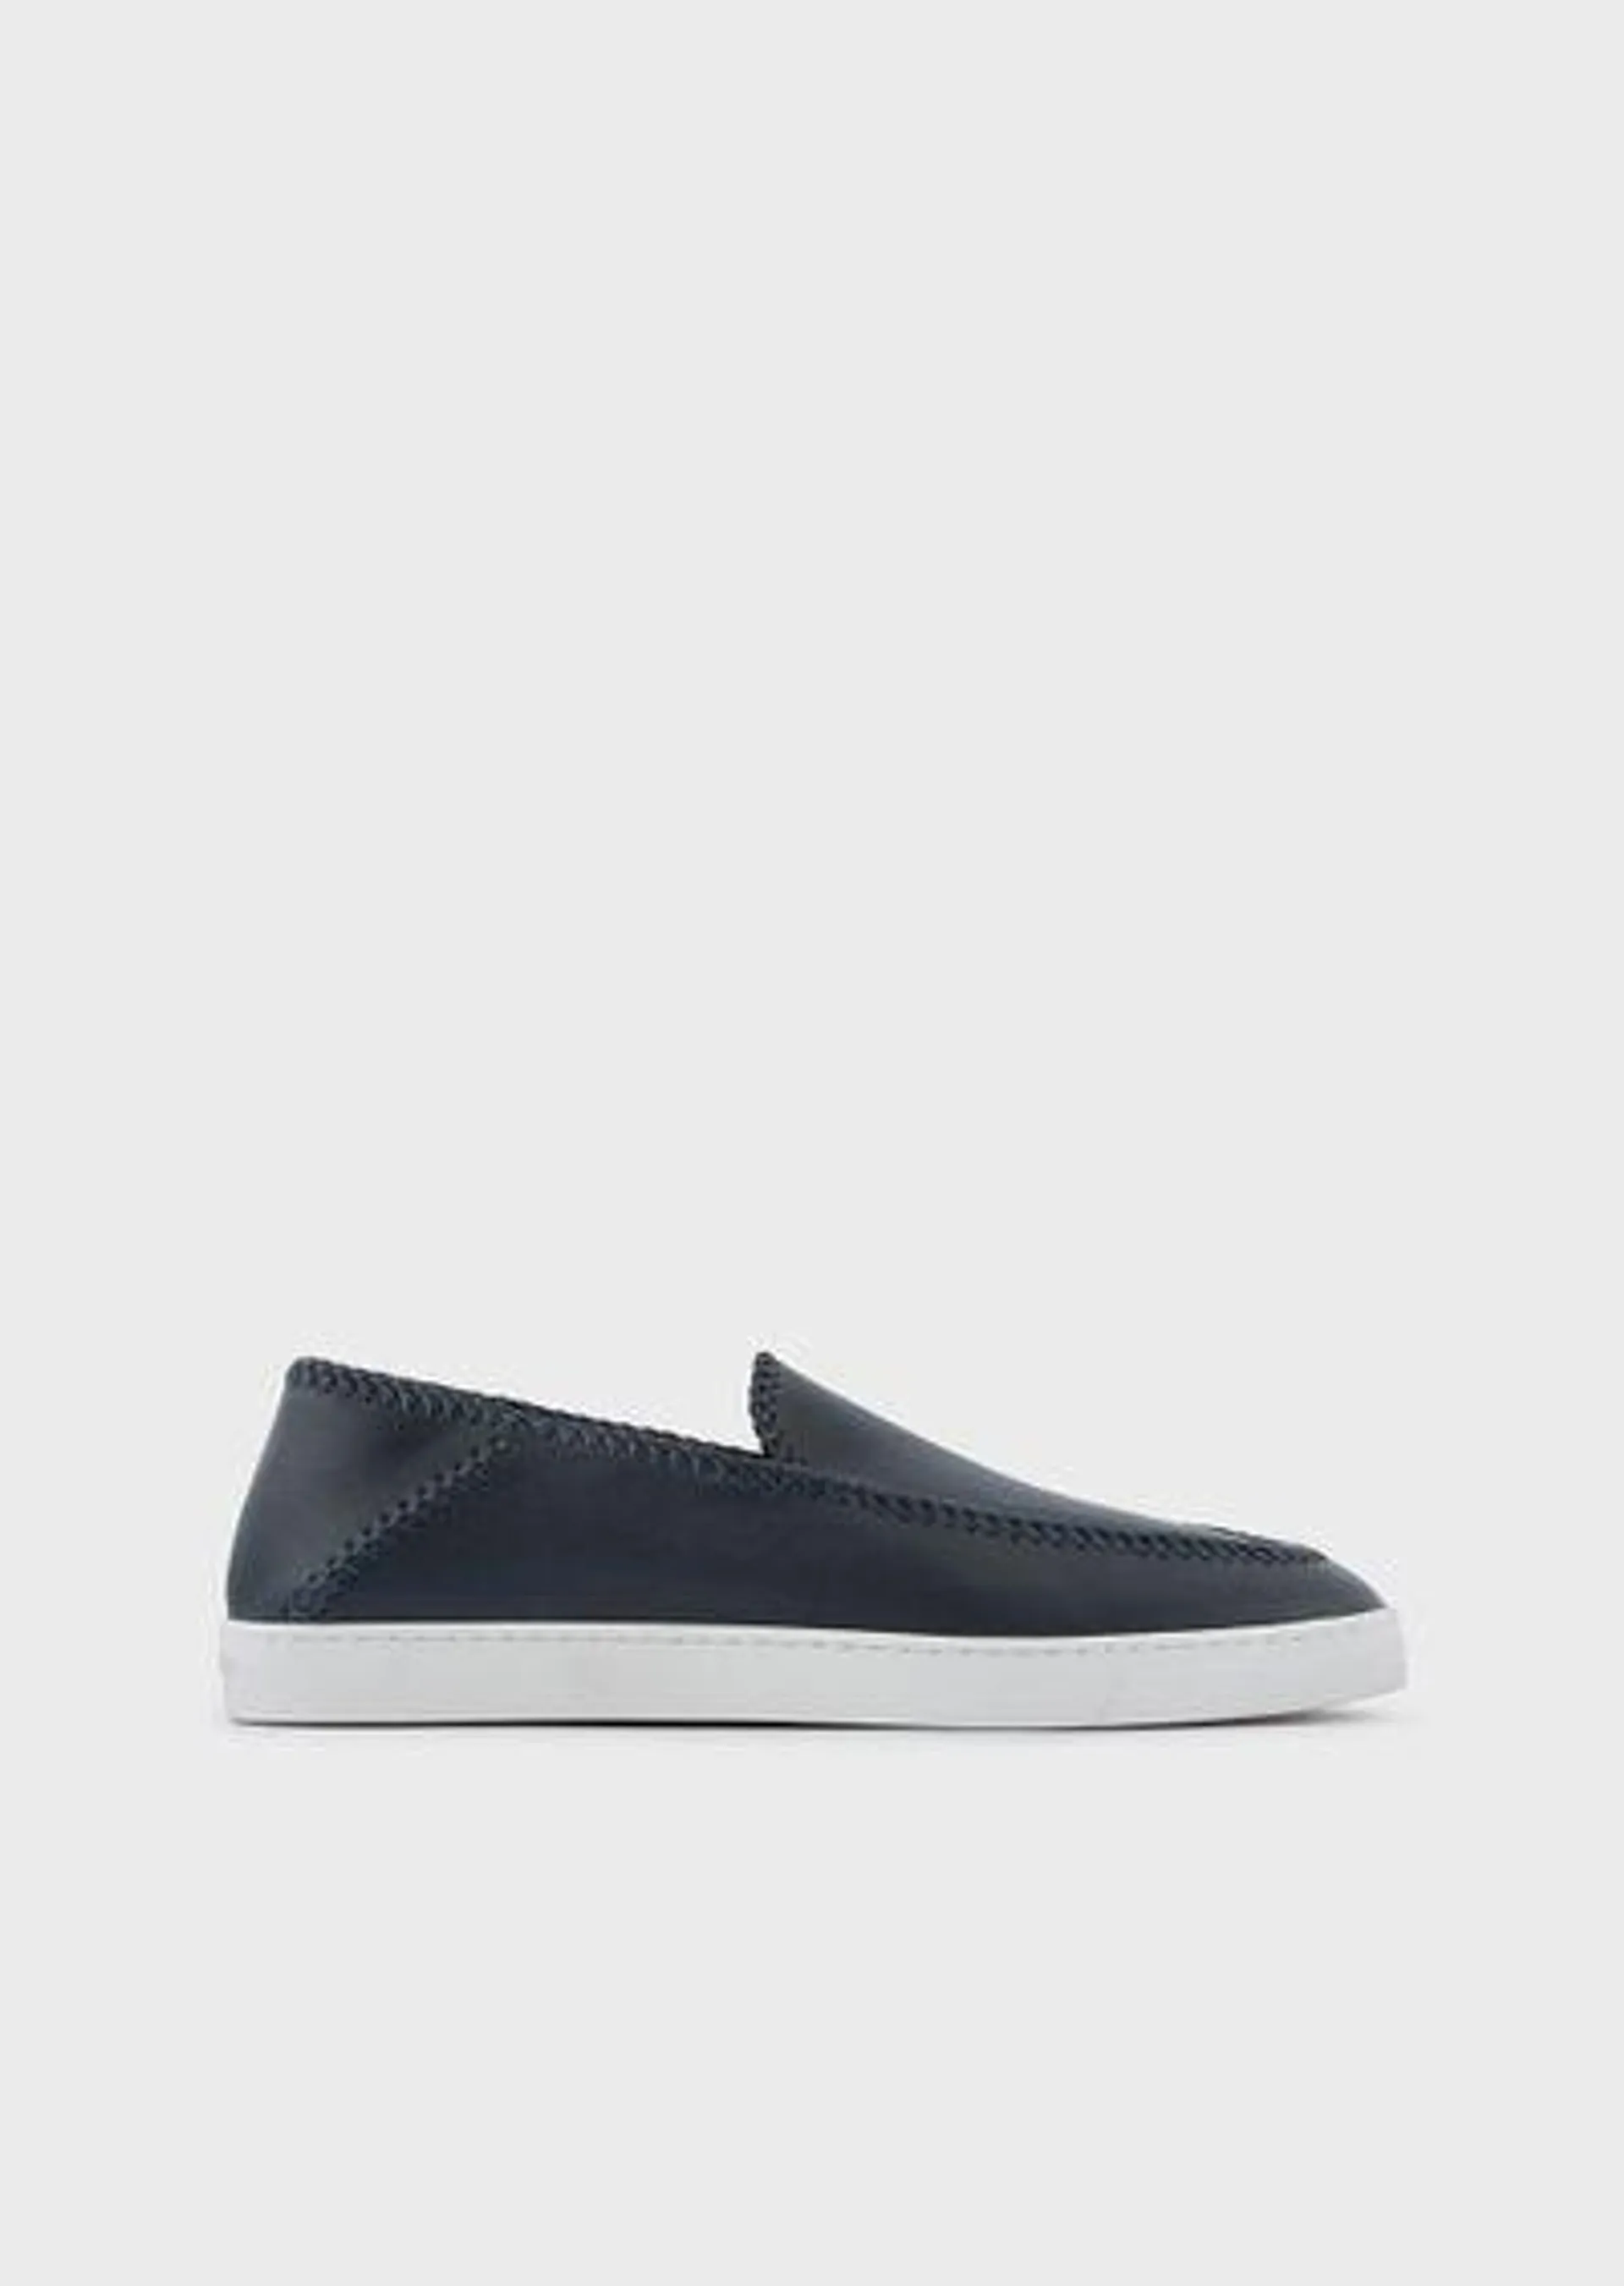 Galleria 3 Nappa-leather slip-ons